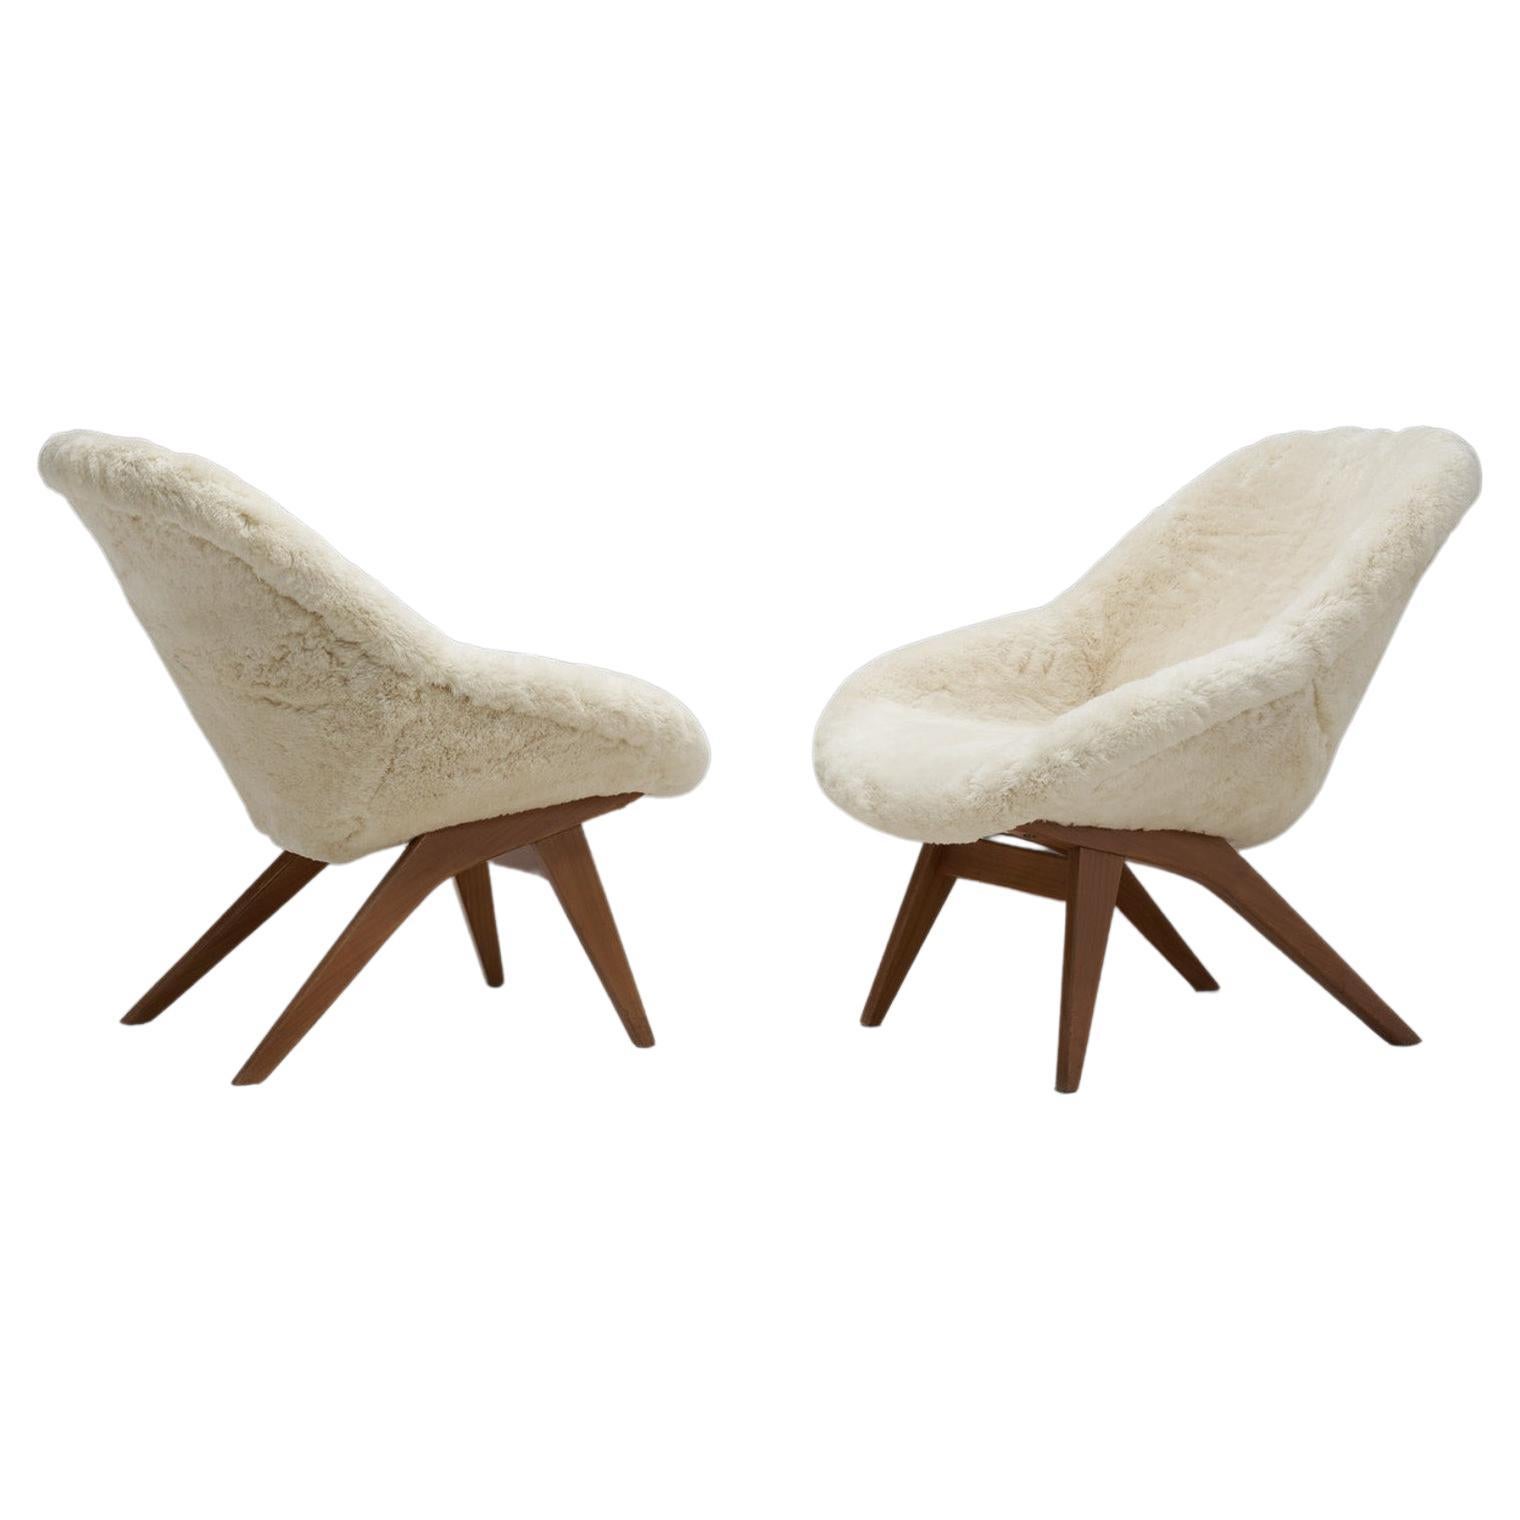 European Mid-Century Modern Lounge Chairs with Tapered Legs, Europe circa 1950 For Sale